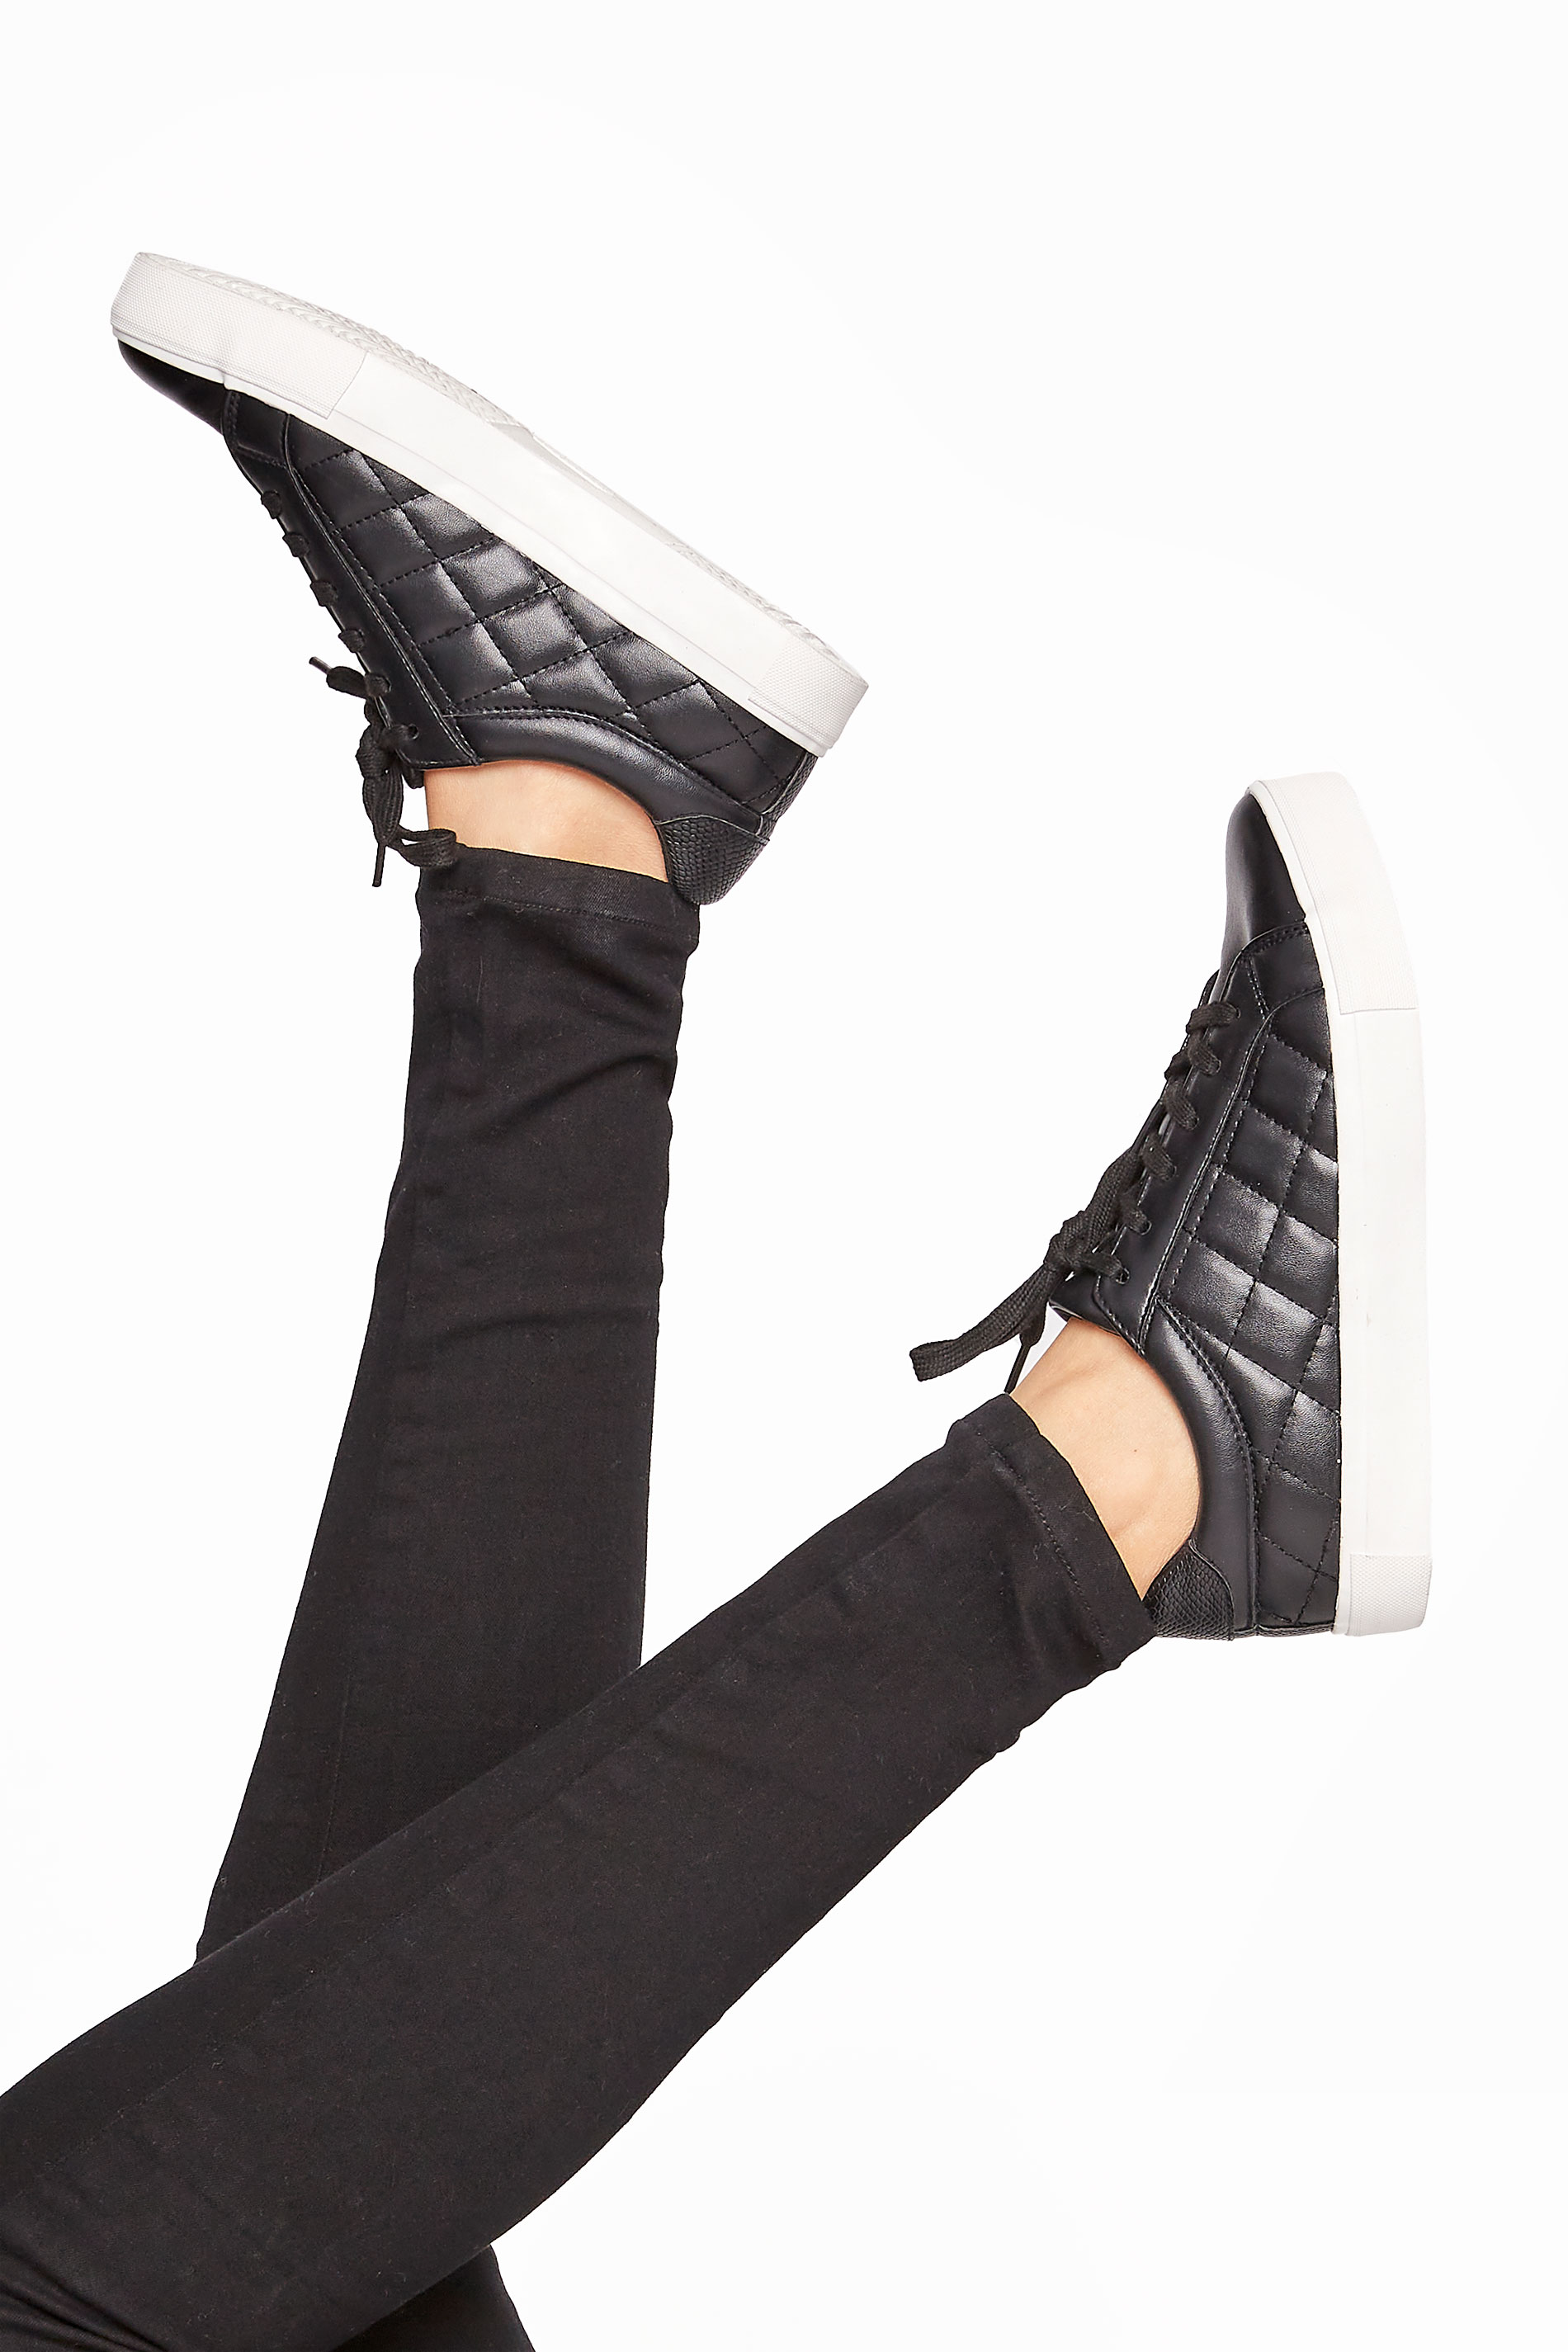 Grande taille  Trainers Grande taille  Slip On Trainers | LTS Black Quilted Trainers In Standard D Fit - ZA82140